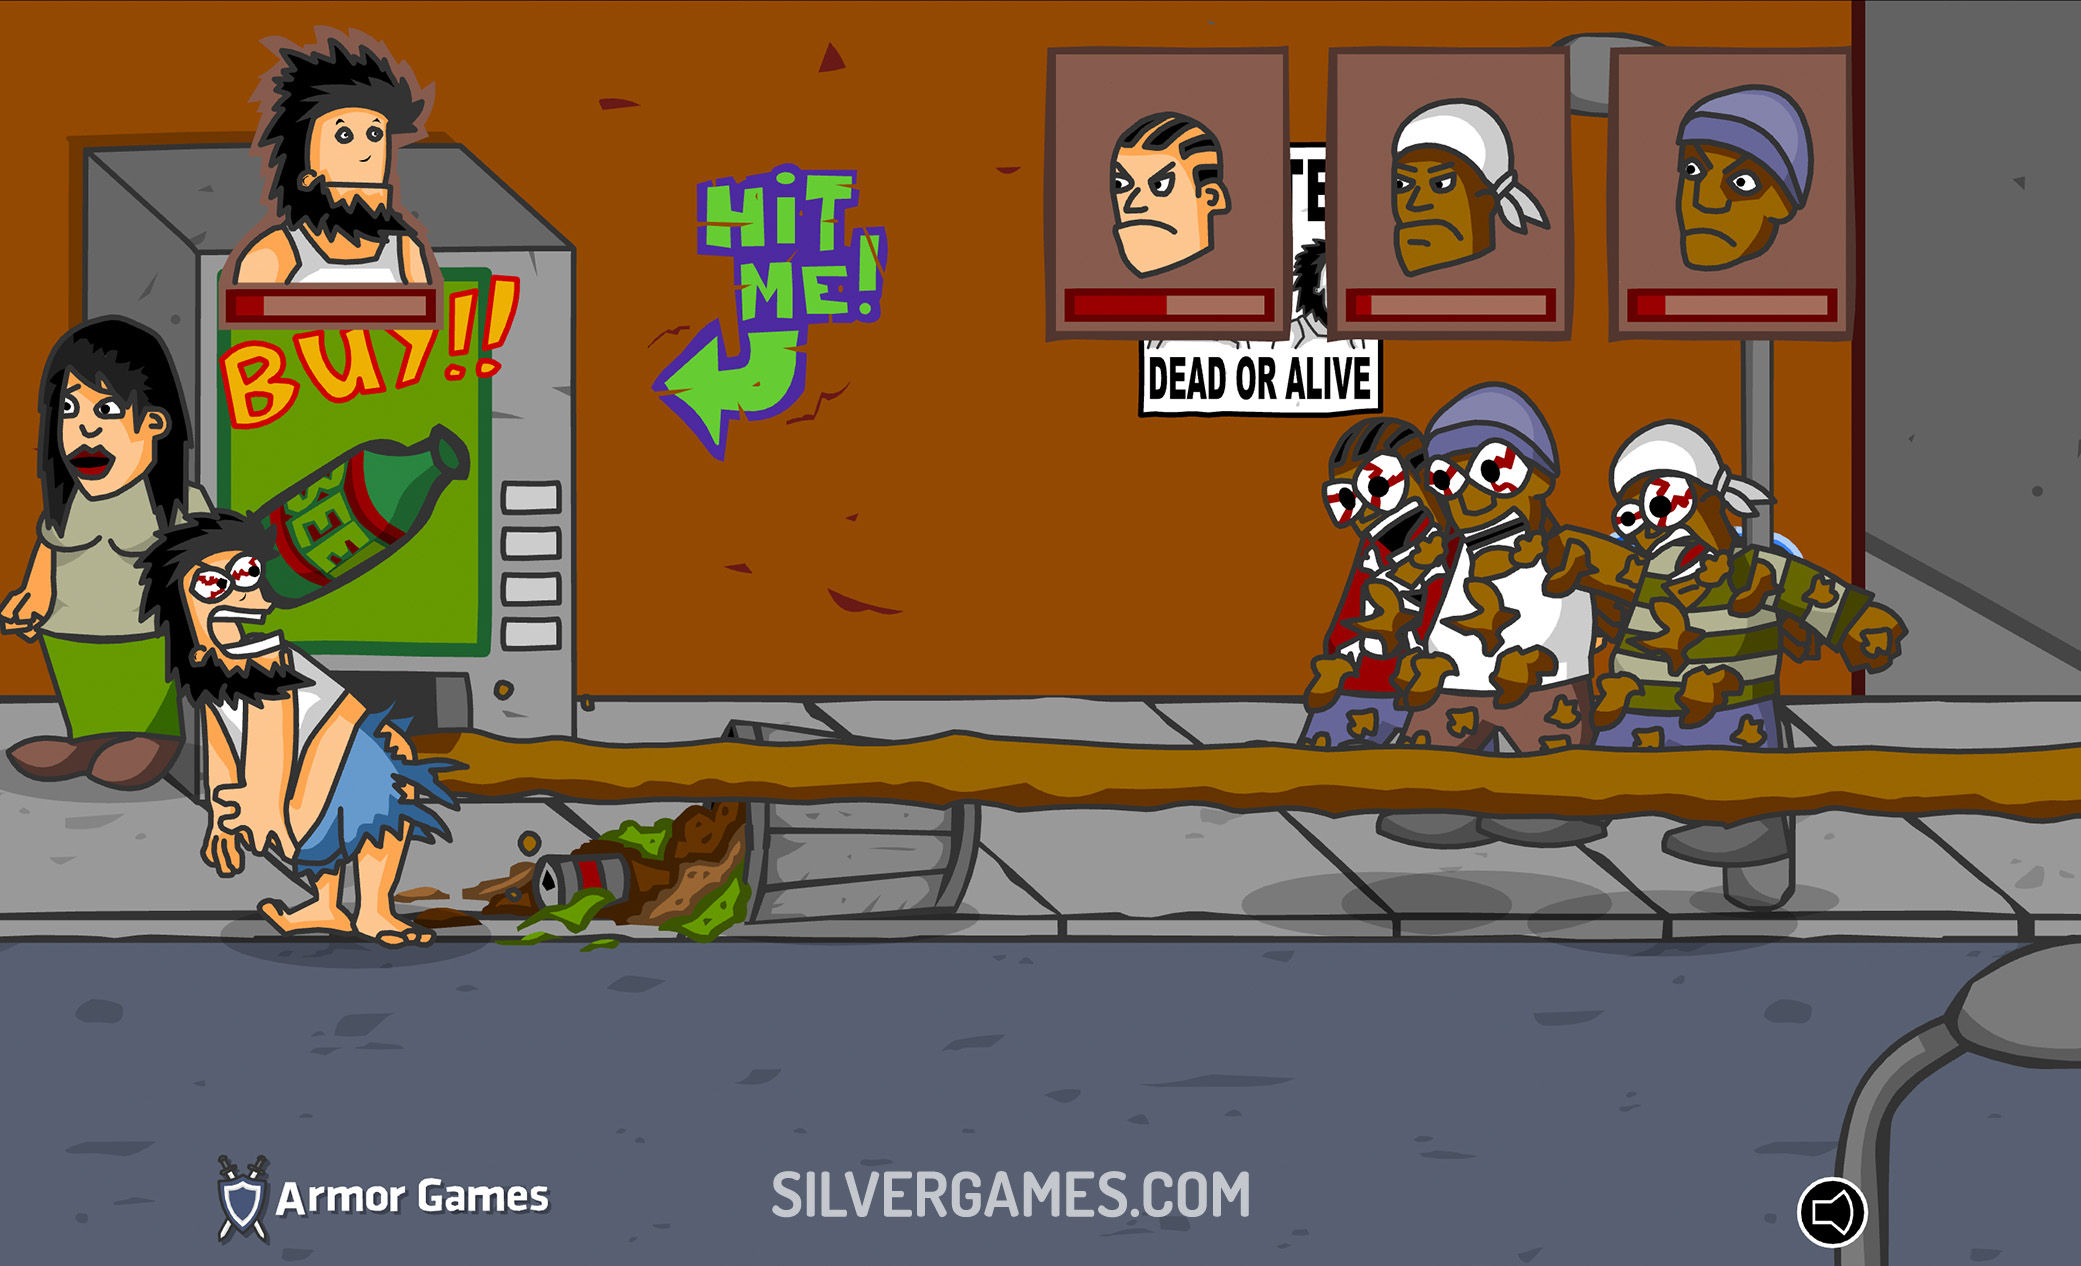 hobo-3-play-online-on-silvergames